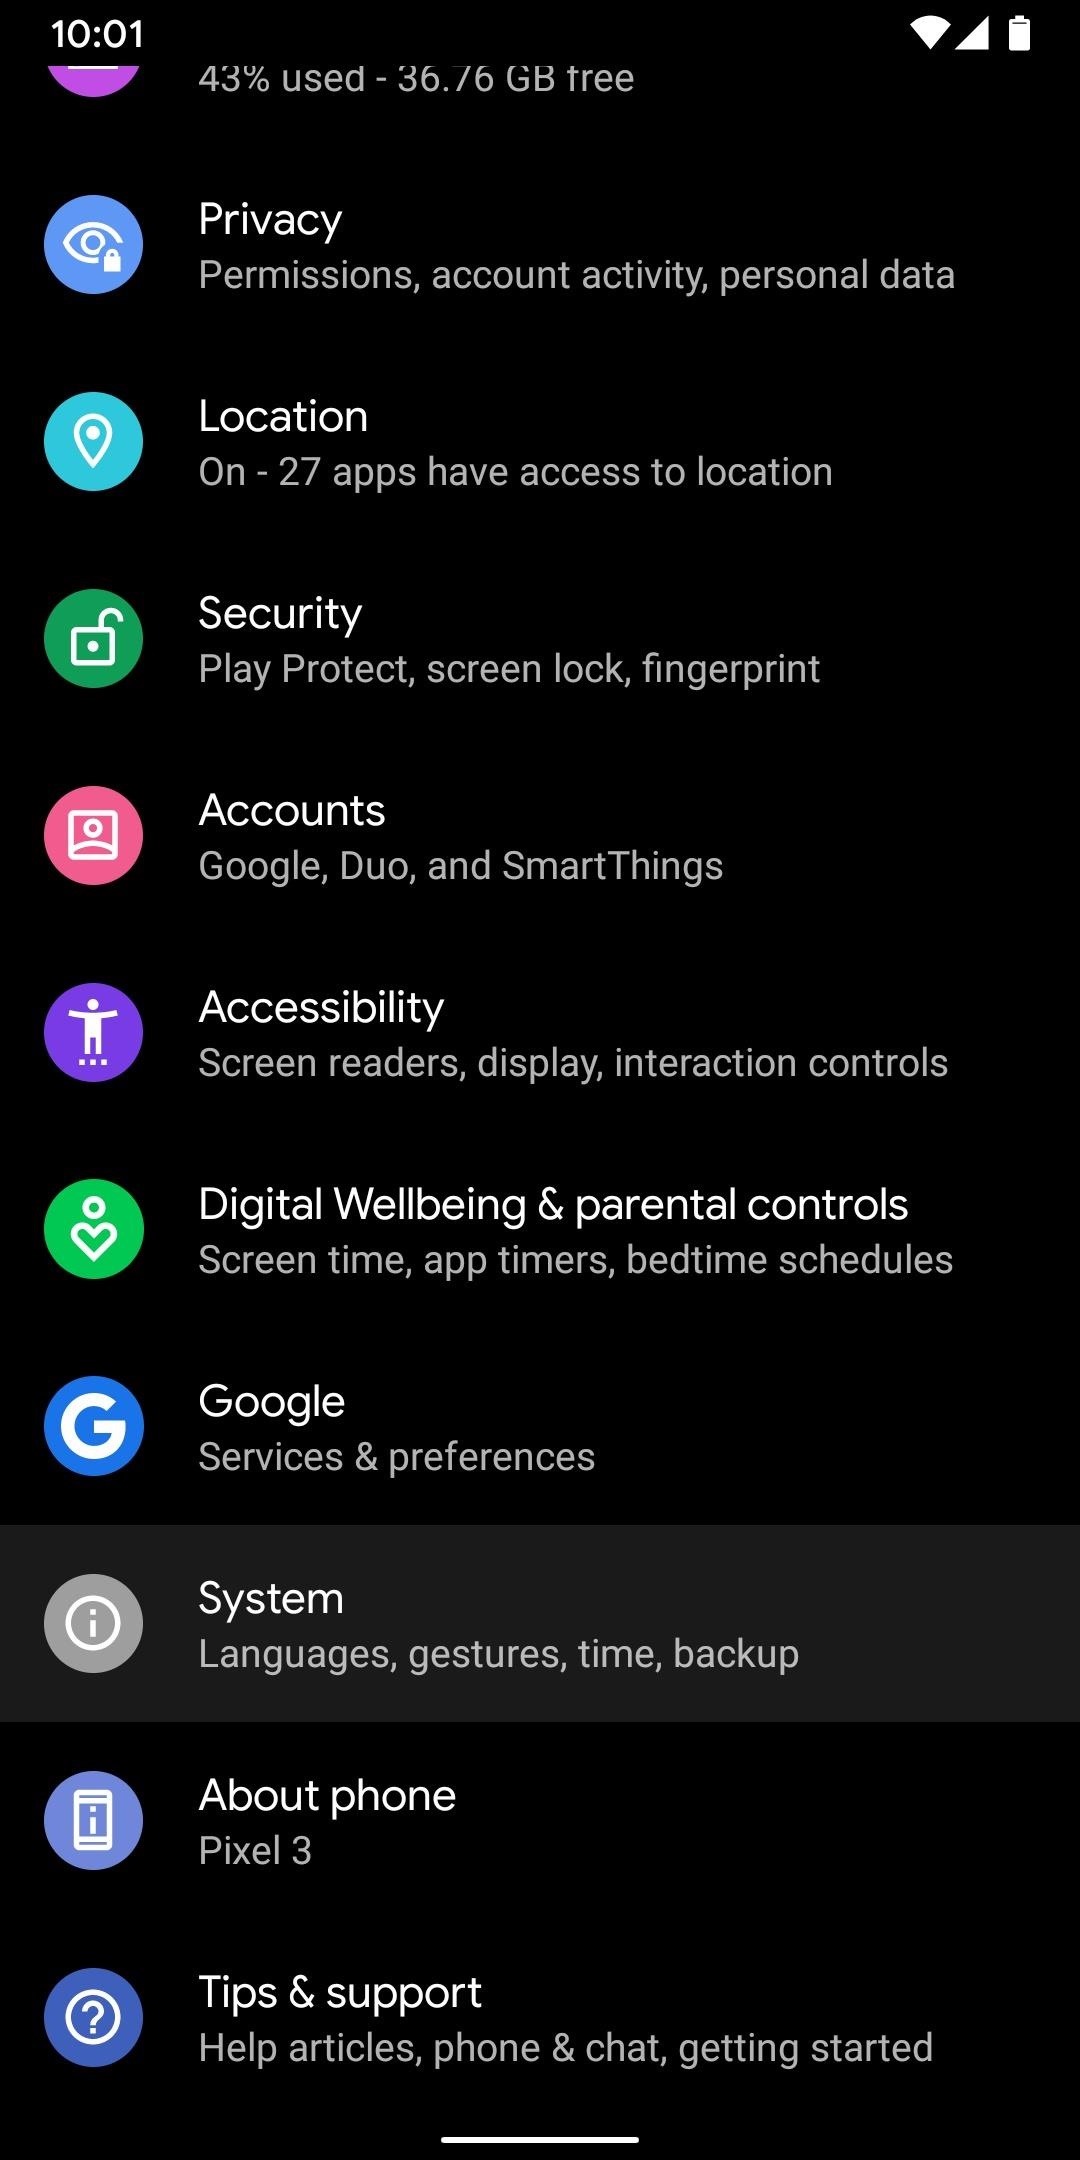 Get Custom Themes on Your Google Pixel with Android 10 — No Root Needed